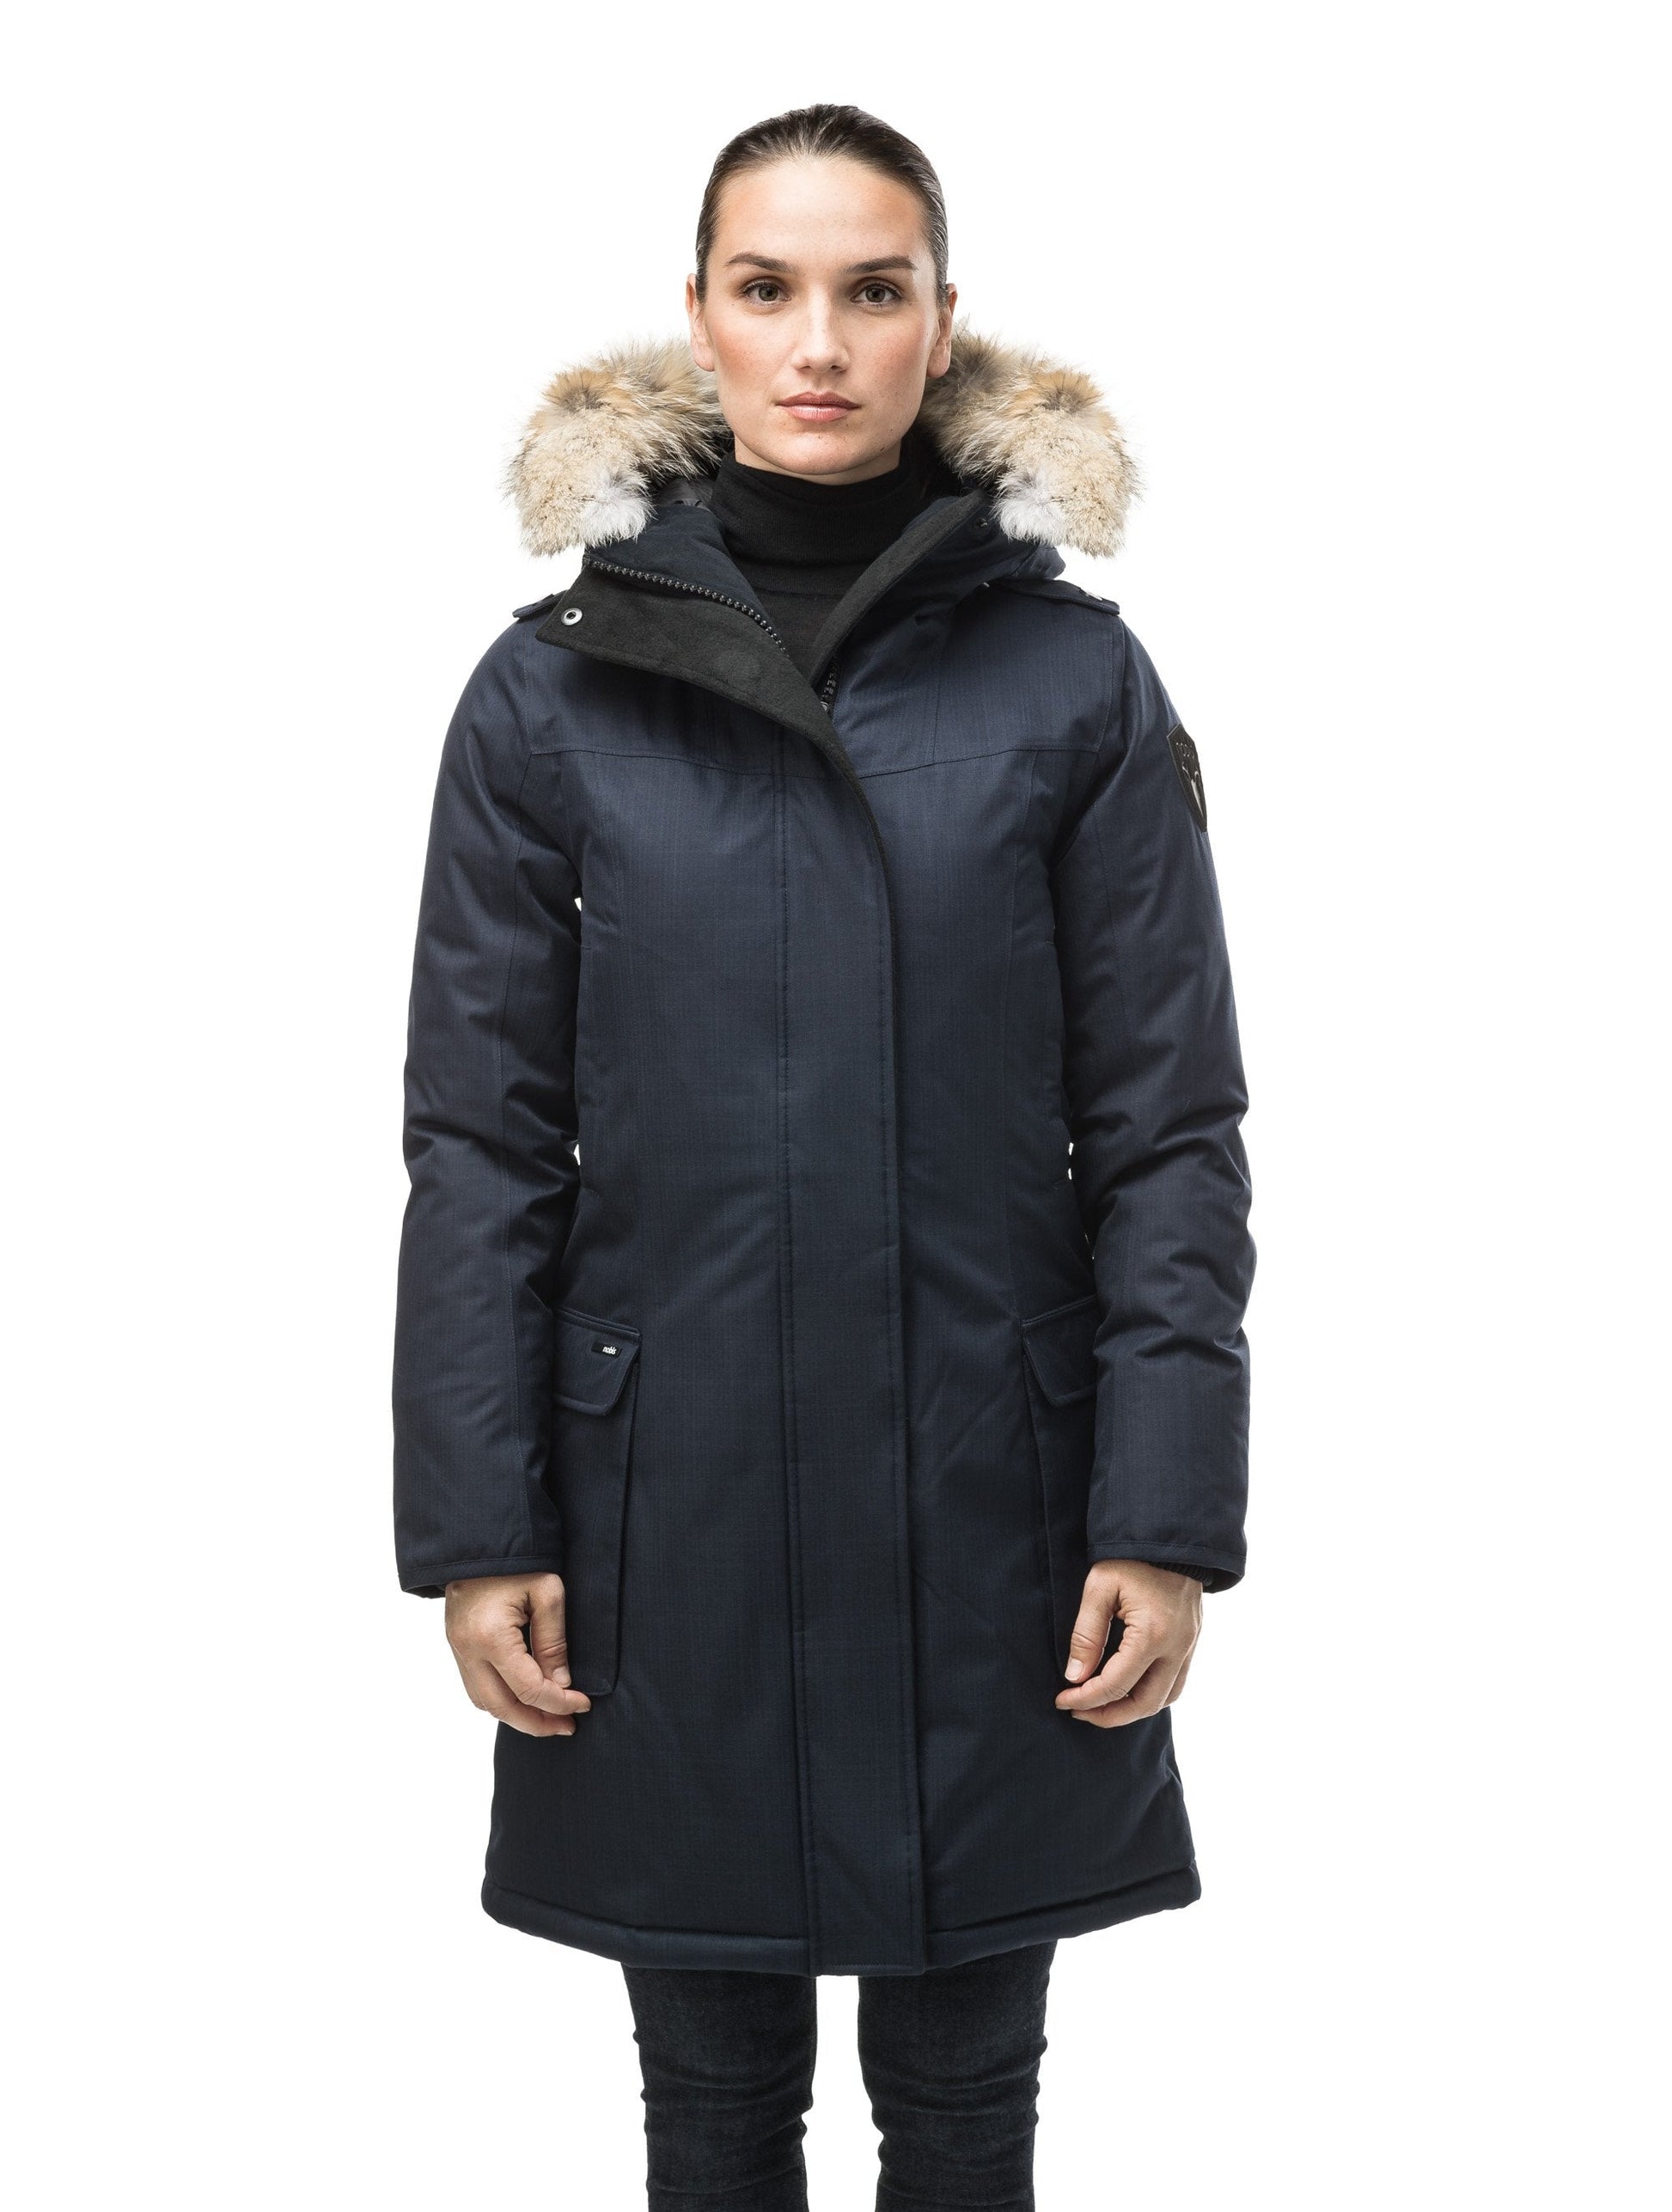 Women's Black Quilted Puffer Jacket for Winter In Canada